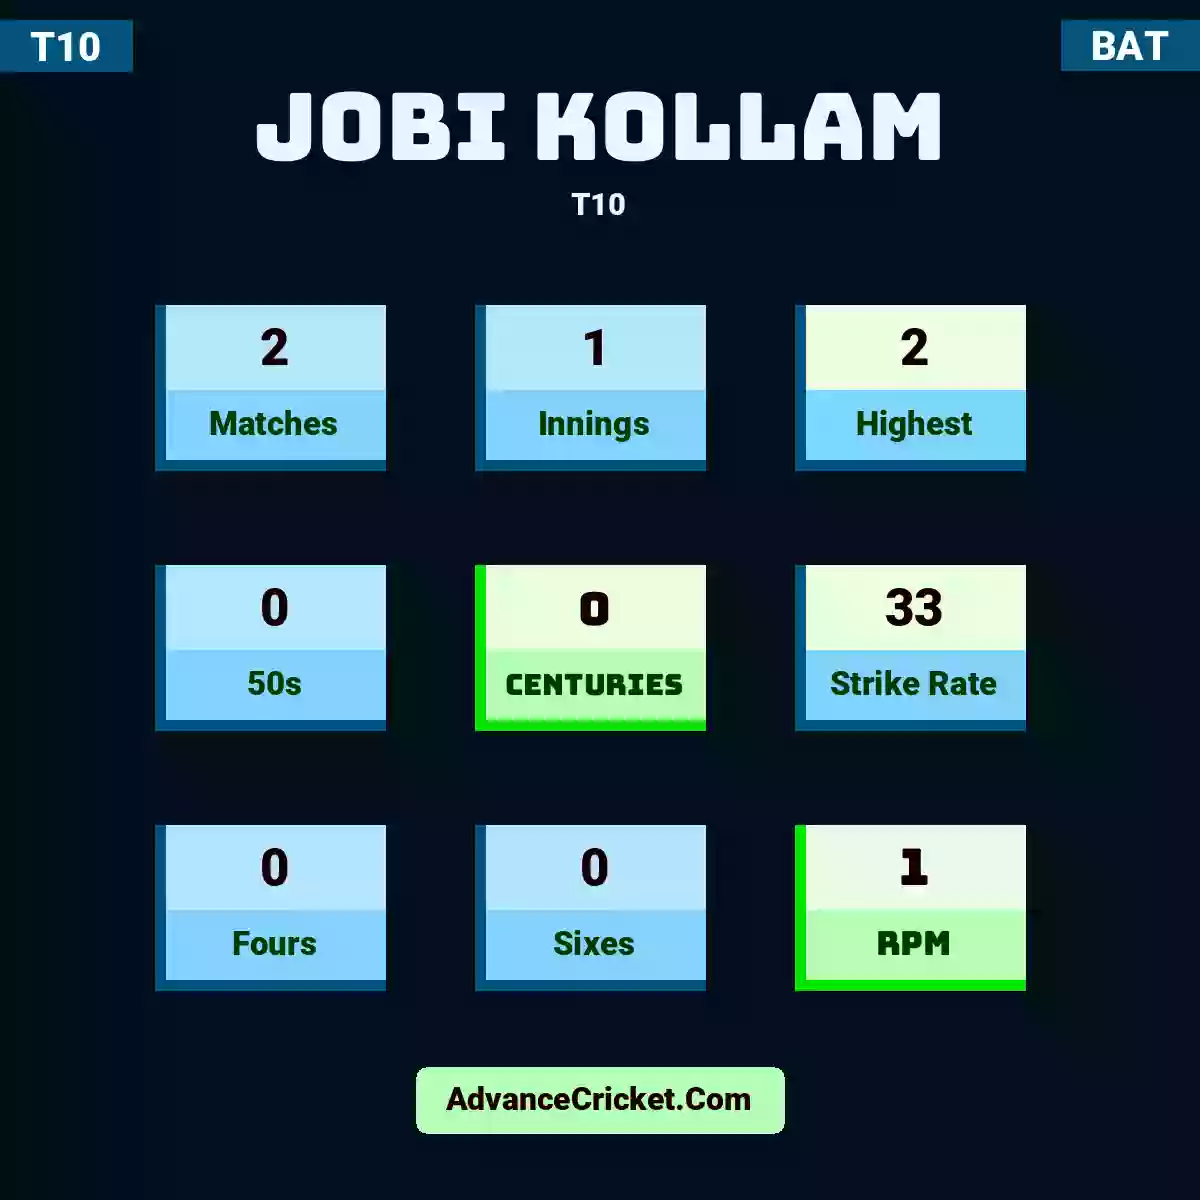 Jobi Kollam T10 , Jobi Kollam played 2 matches, scored 2 runs as highest, 0 half-centuries, and 0 centuries, with a strike rate of 33. J.Kollam hit 0 fours and 0 sixes, with an RPM of 1.